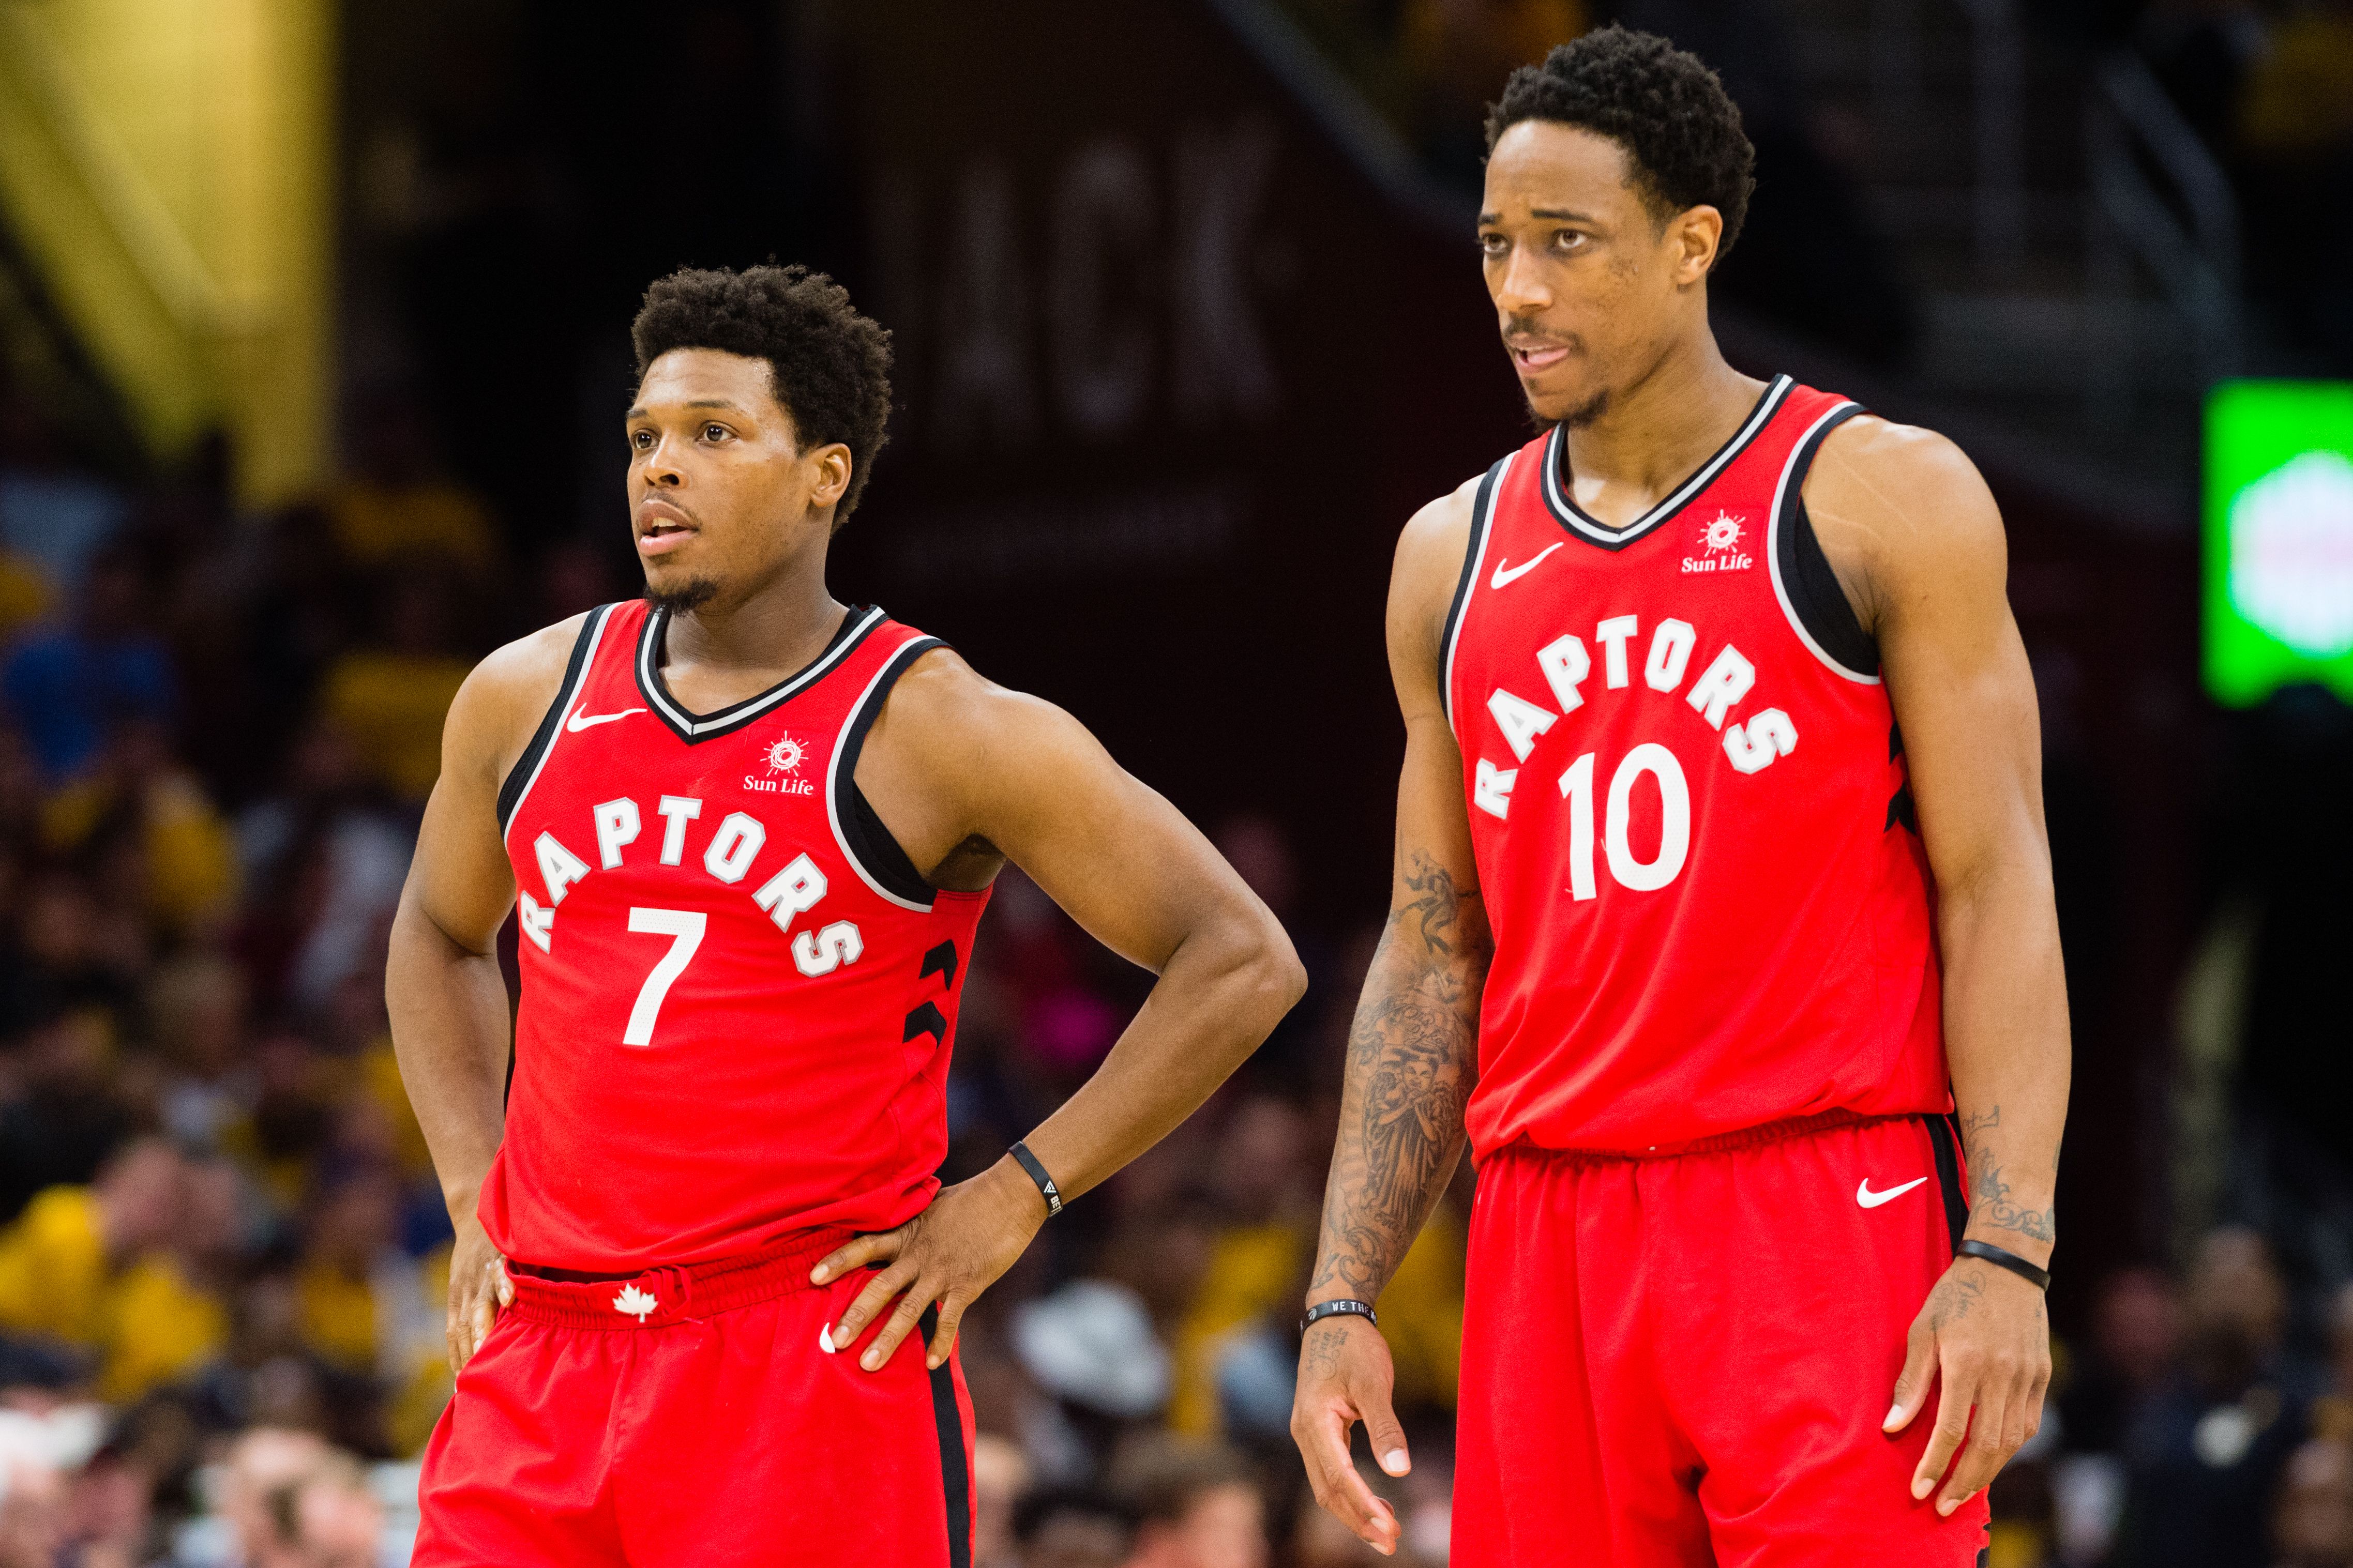 Kyle Lowry and DeMar DeRozan waiting for the ref's decision